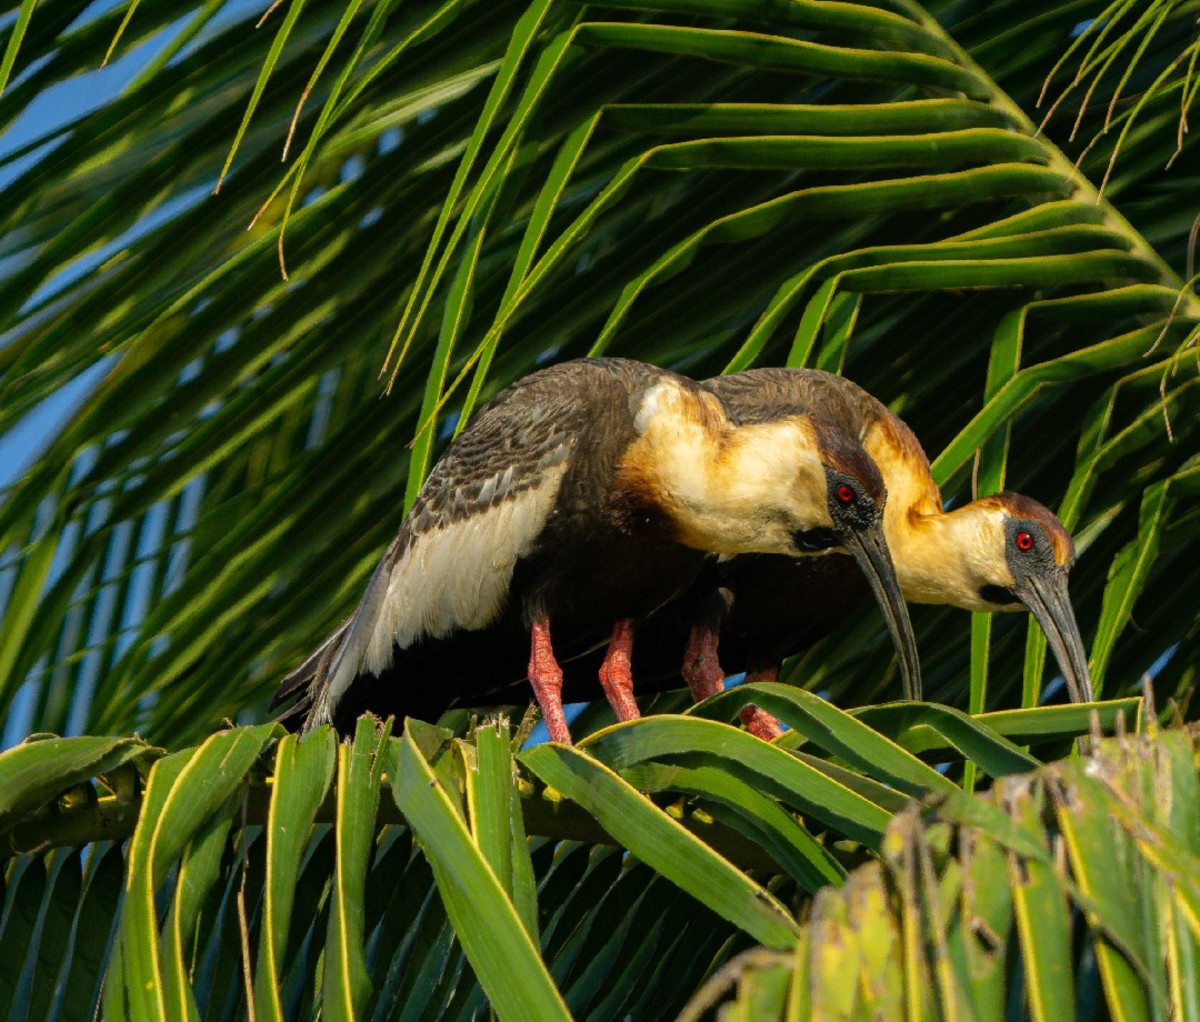 Two tropical birds in a palm tree in Colombia.